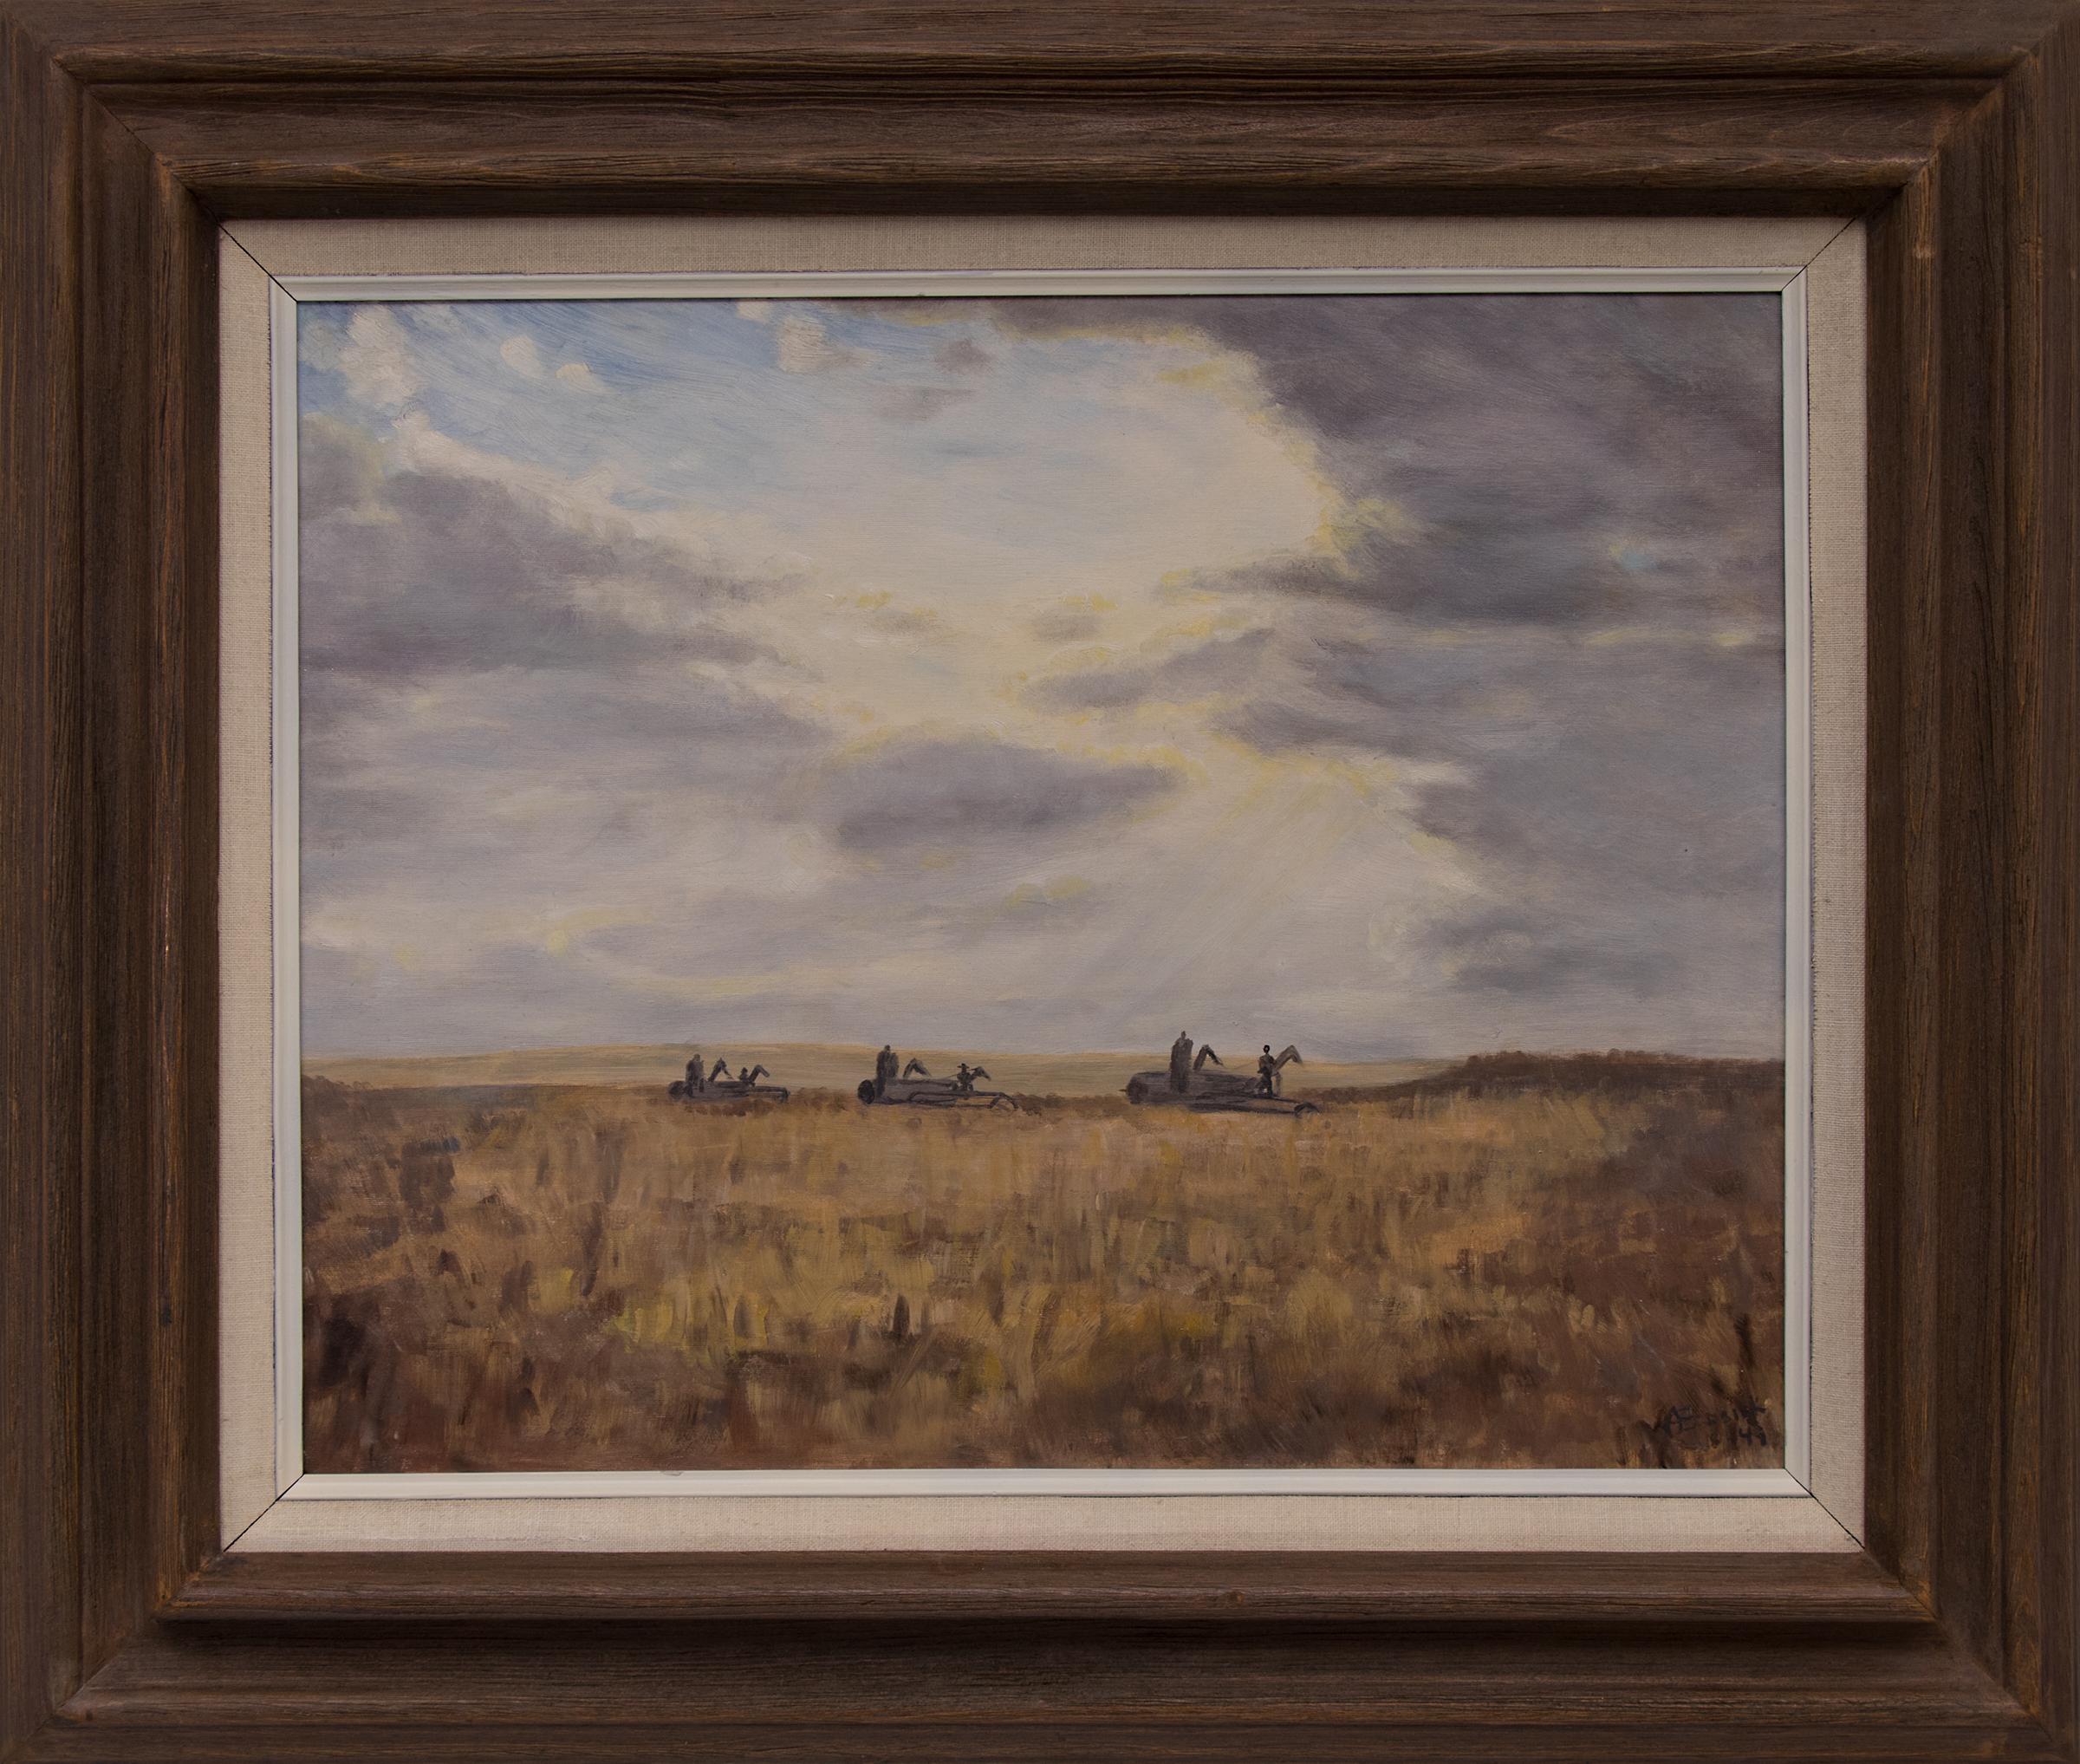 Anna Essick Figurative Painting - Harvesting Wheat in Colorado, American Scene Landscape Oil Painting, Brown, Gray